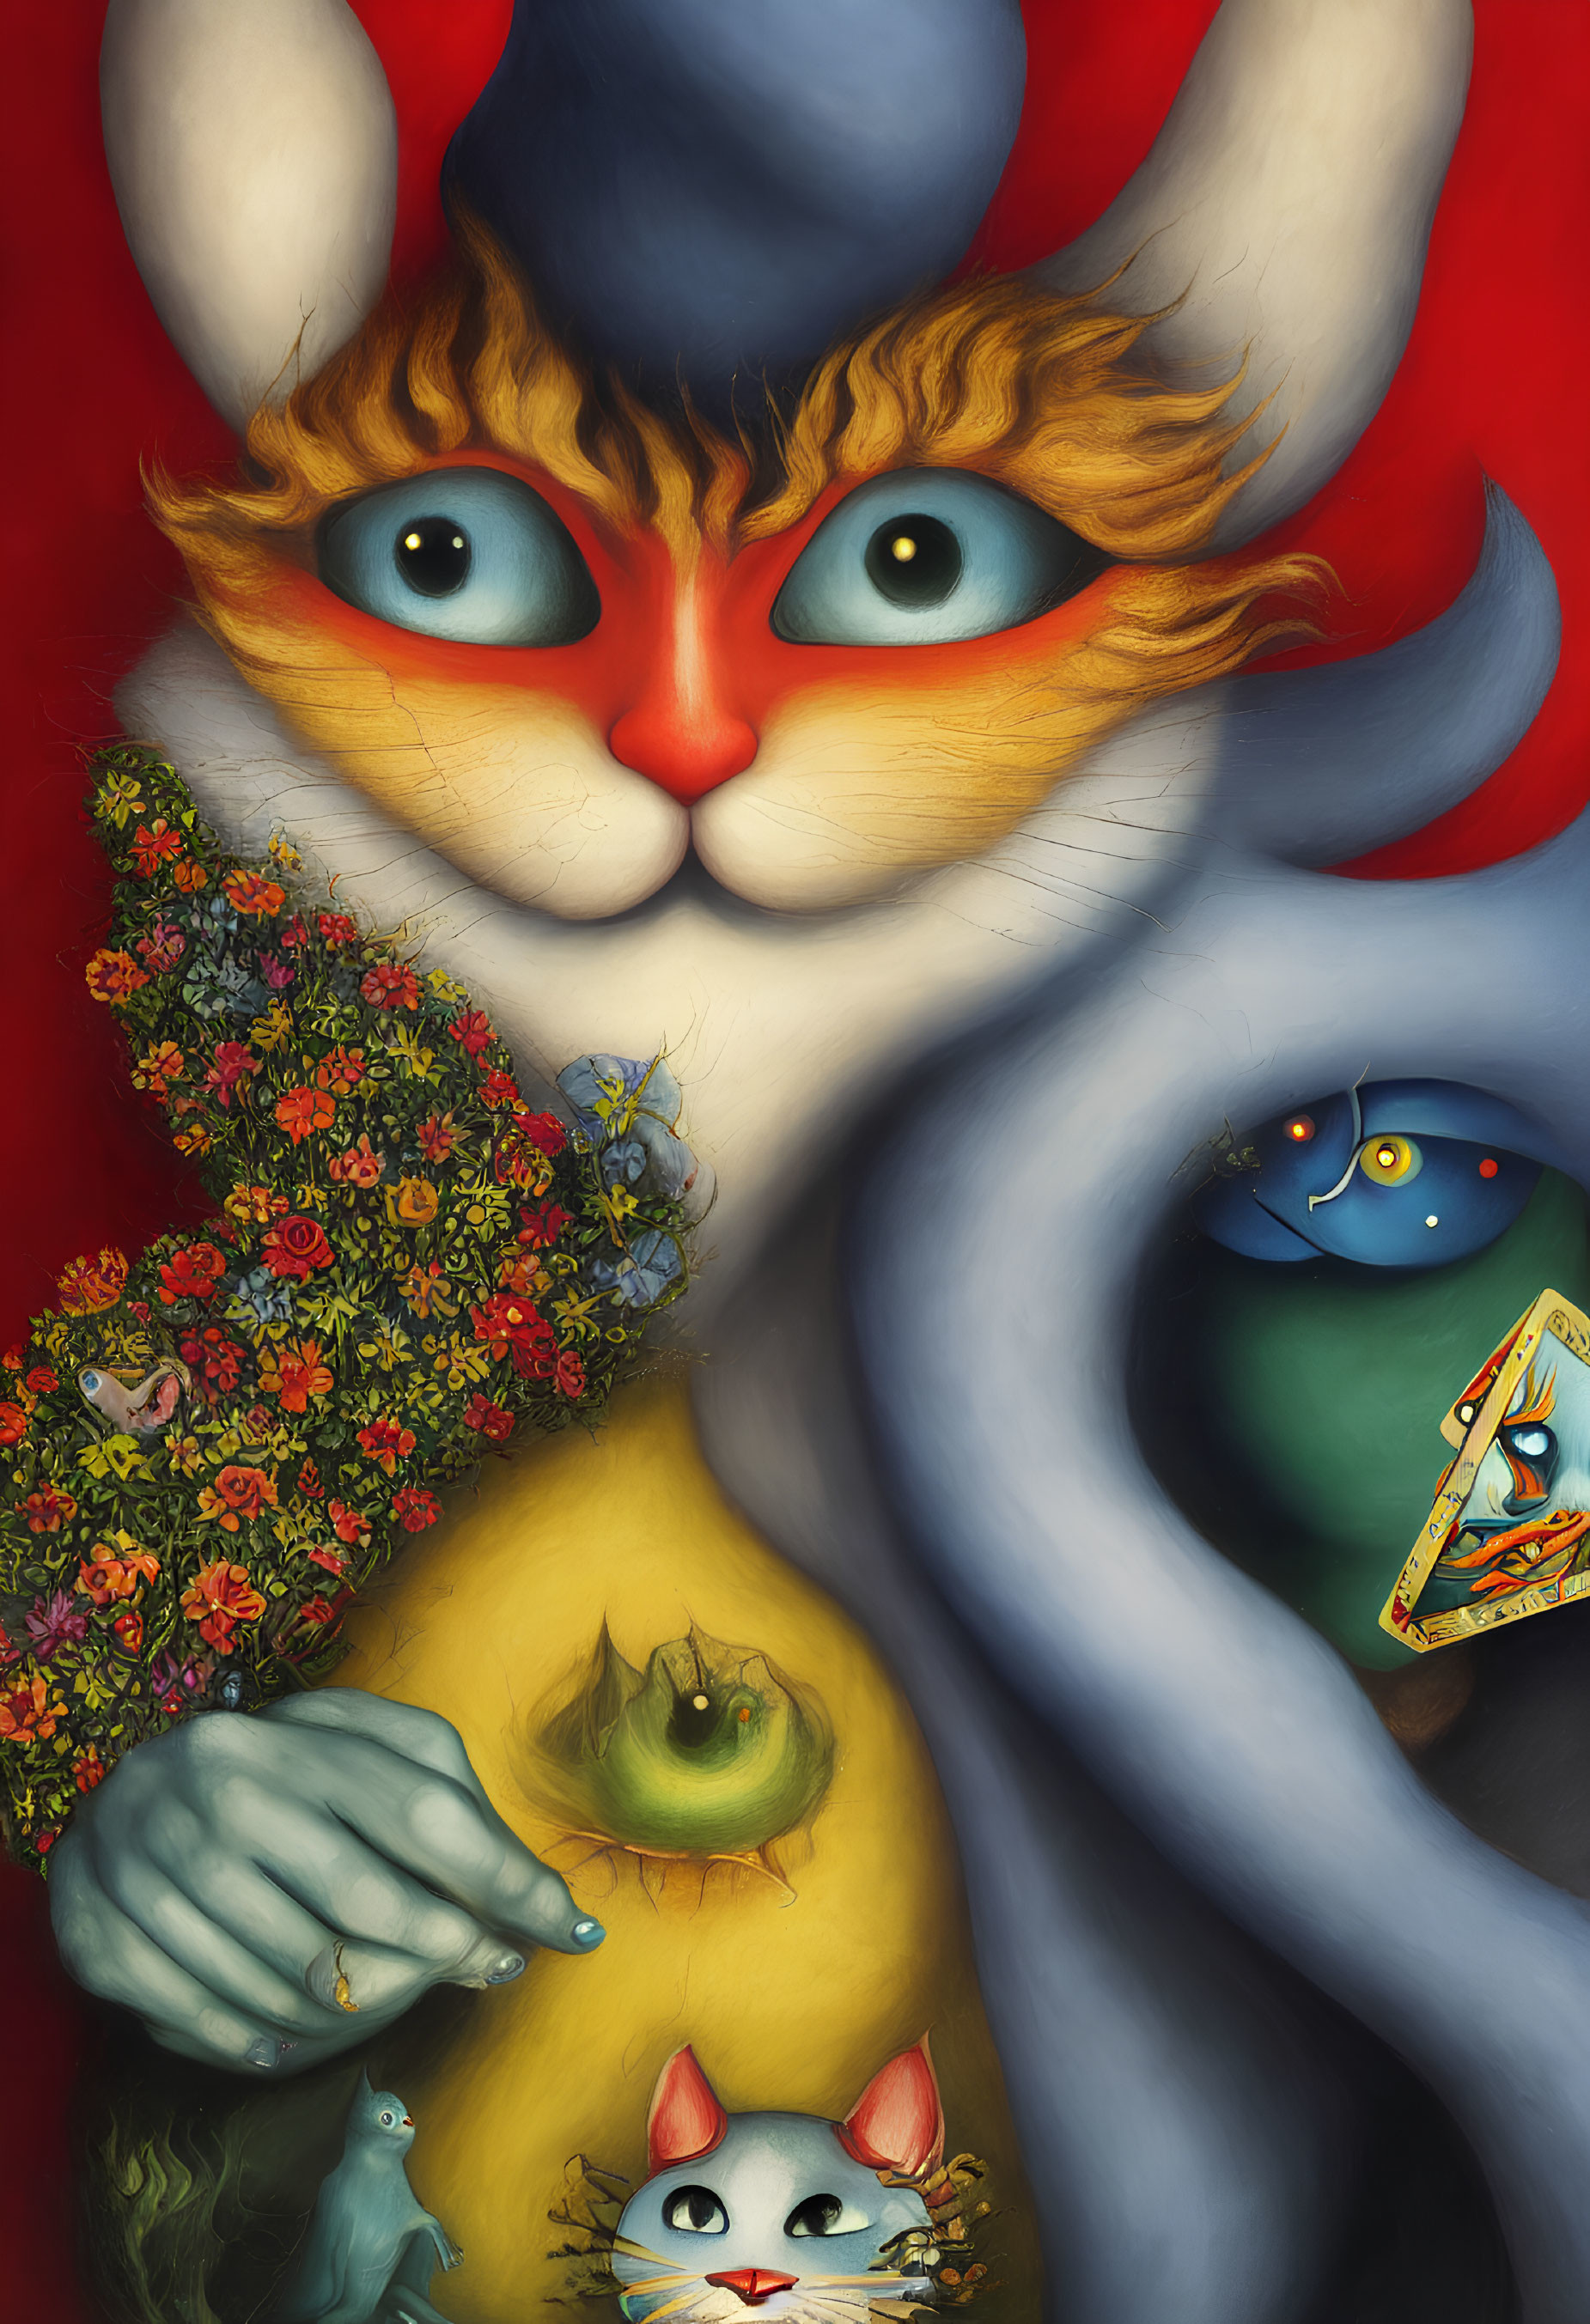 Whimsical cat painting with colorful elements